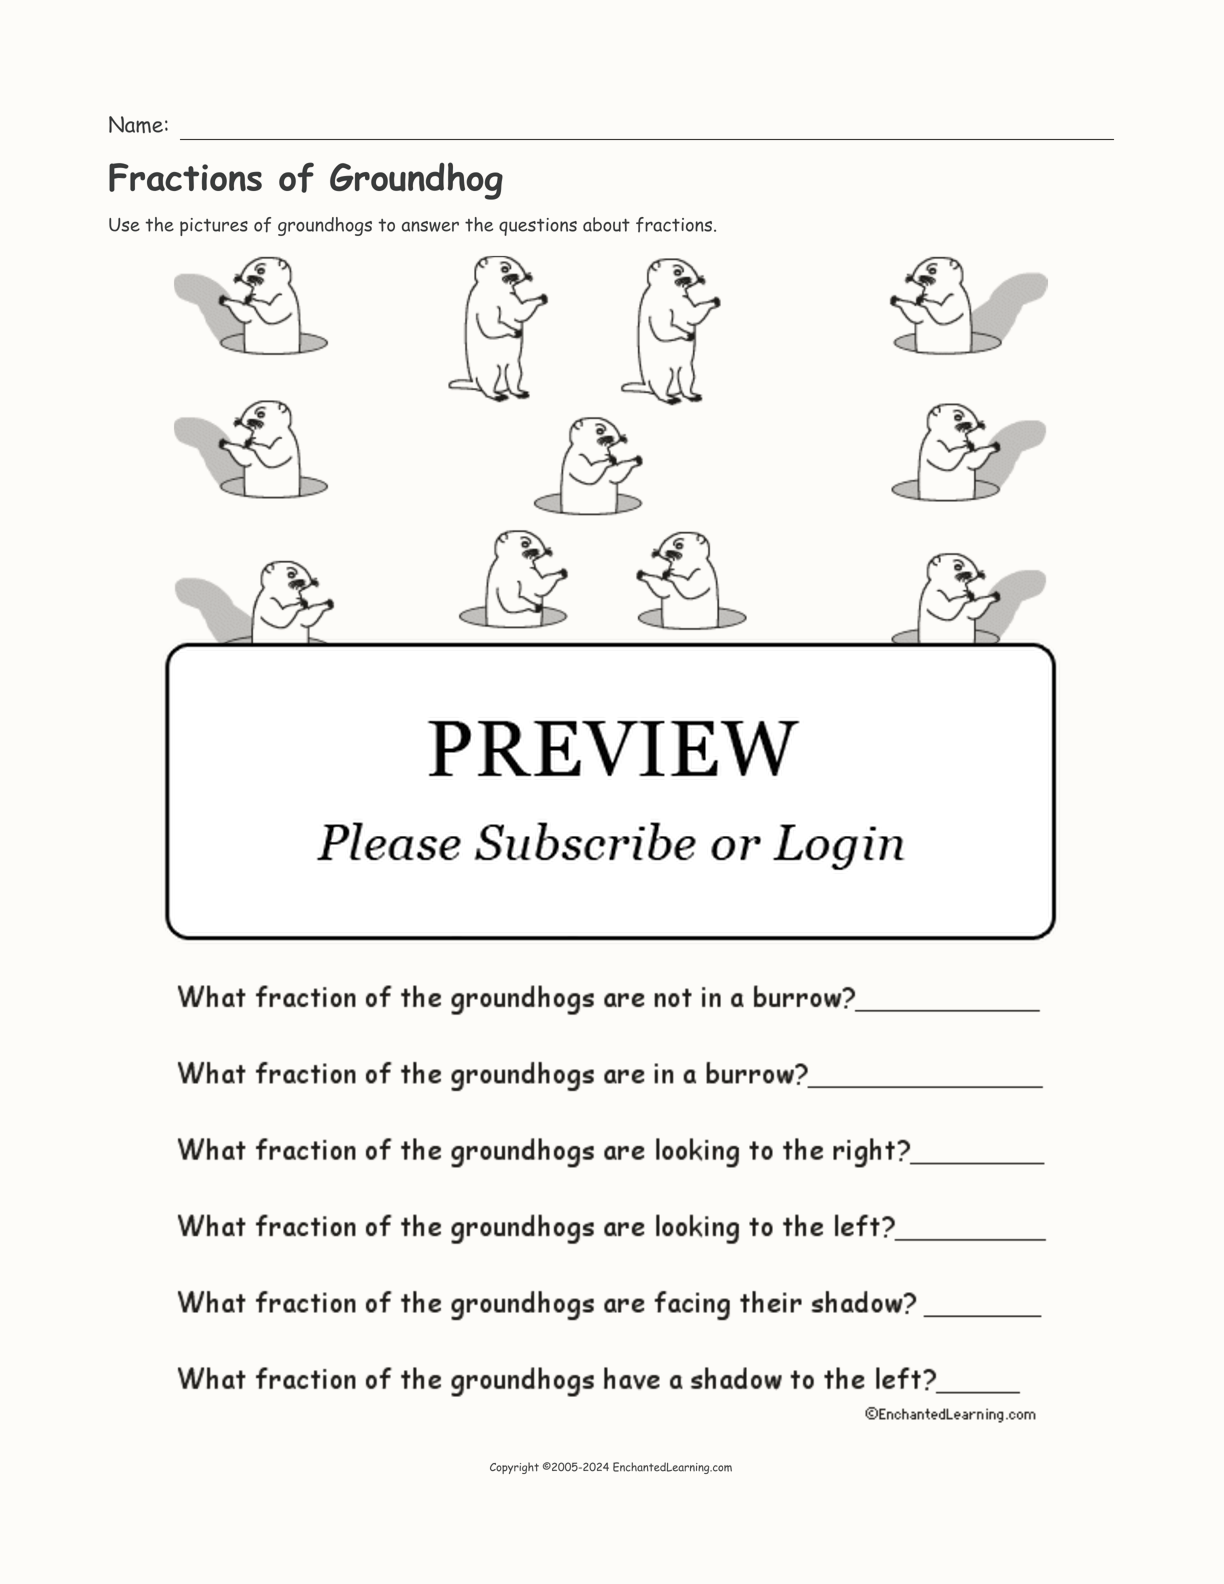 Fractions of Groundhog interactive worksheet page 1